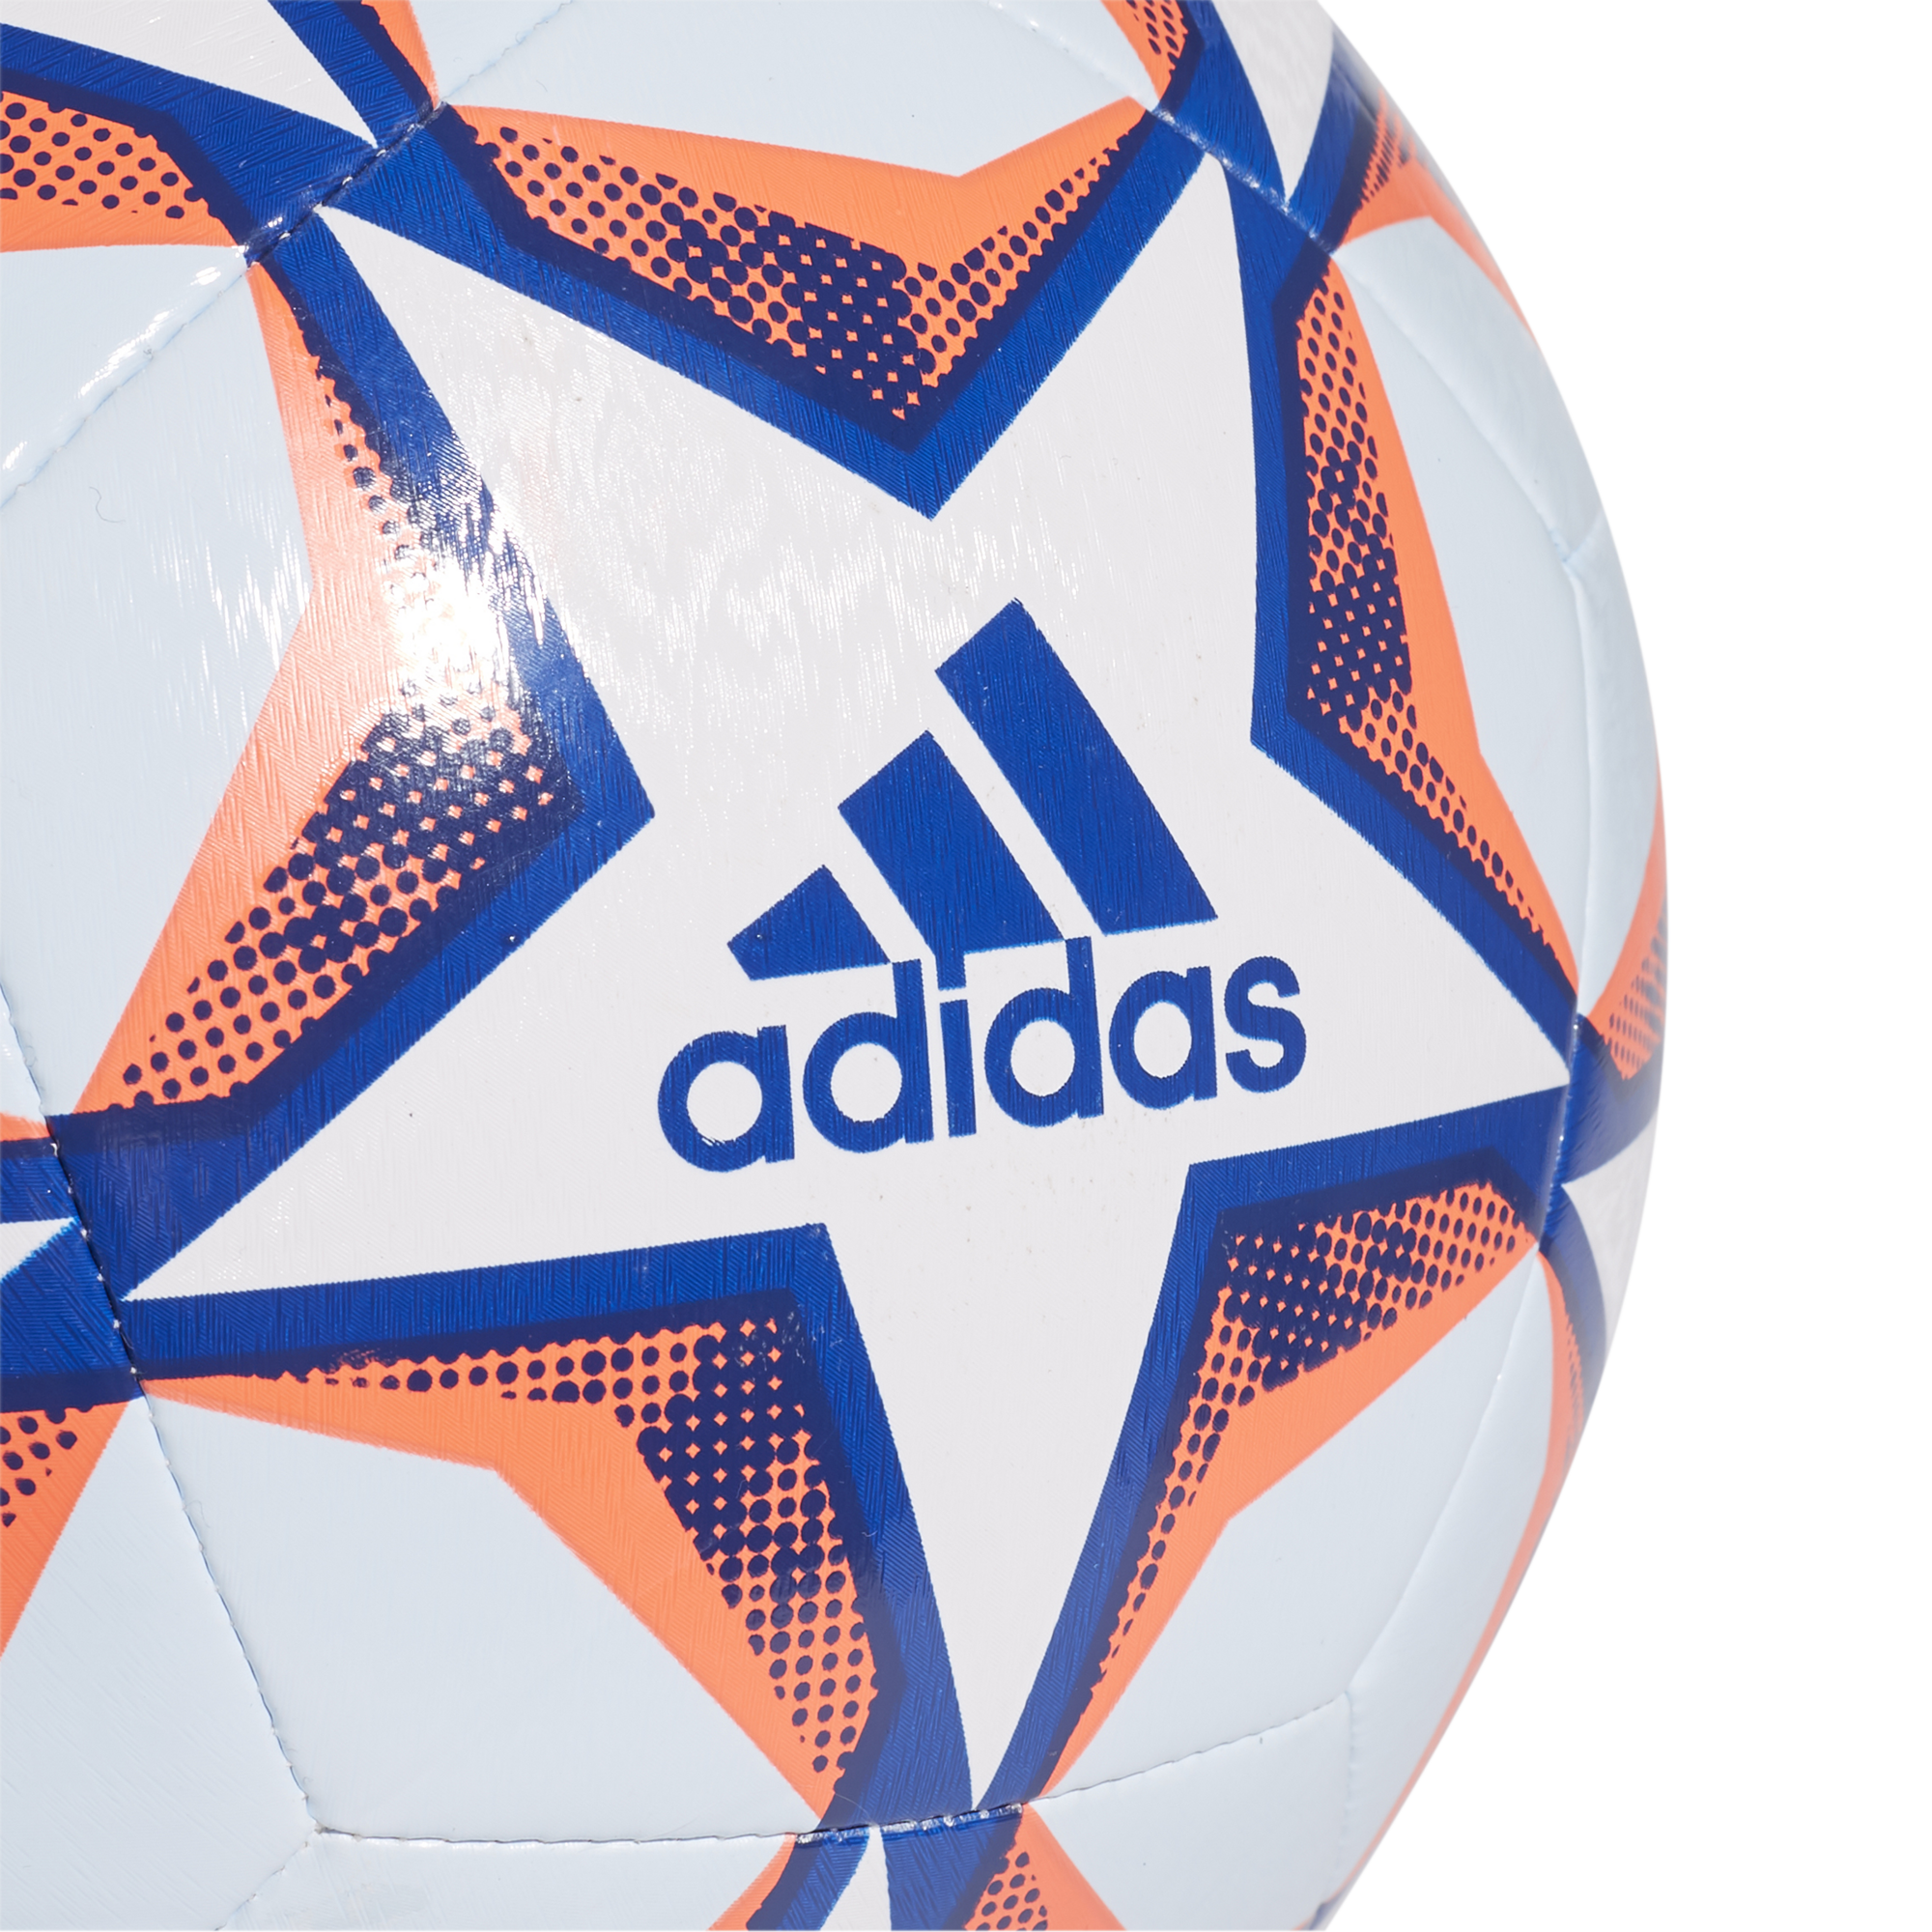 Adidas Champions League Ball Finale Training UCL 2020 2021 ...